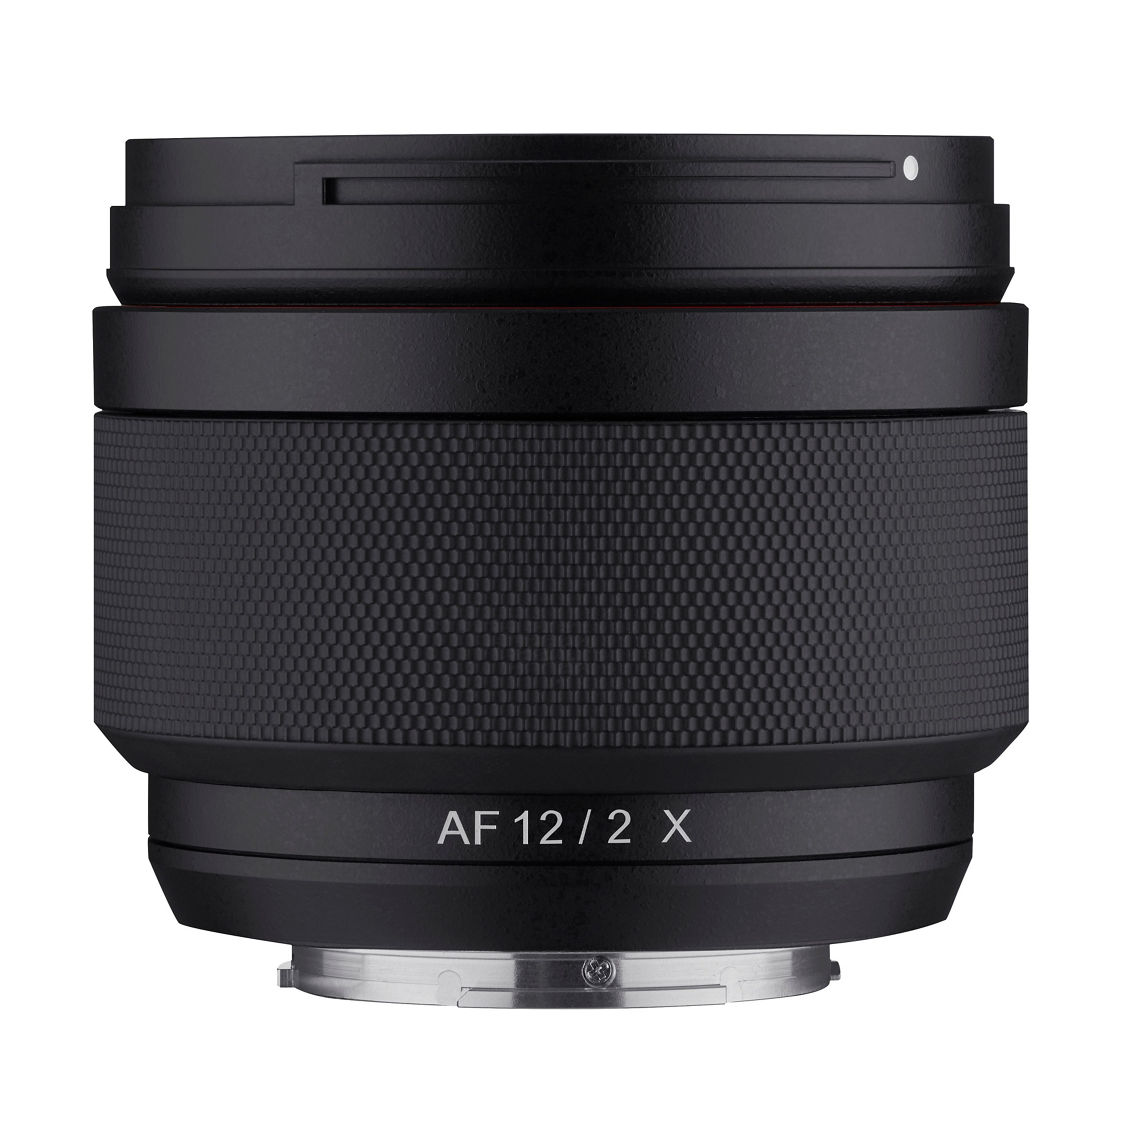 Rokinon 12mm f/2.0 AF APS-C Compact Ultra Wide Angle Lens for Fujifilm X - Image 2 of 4